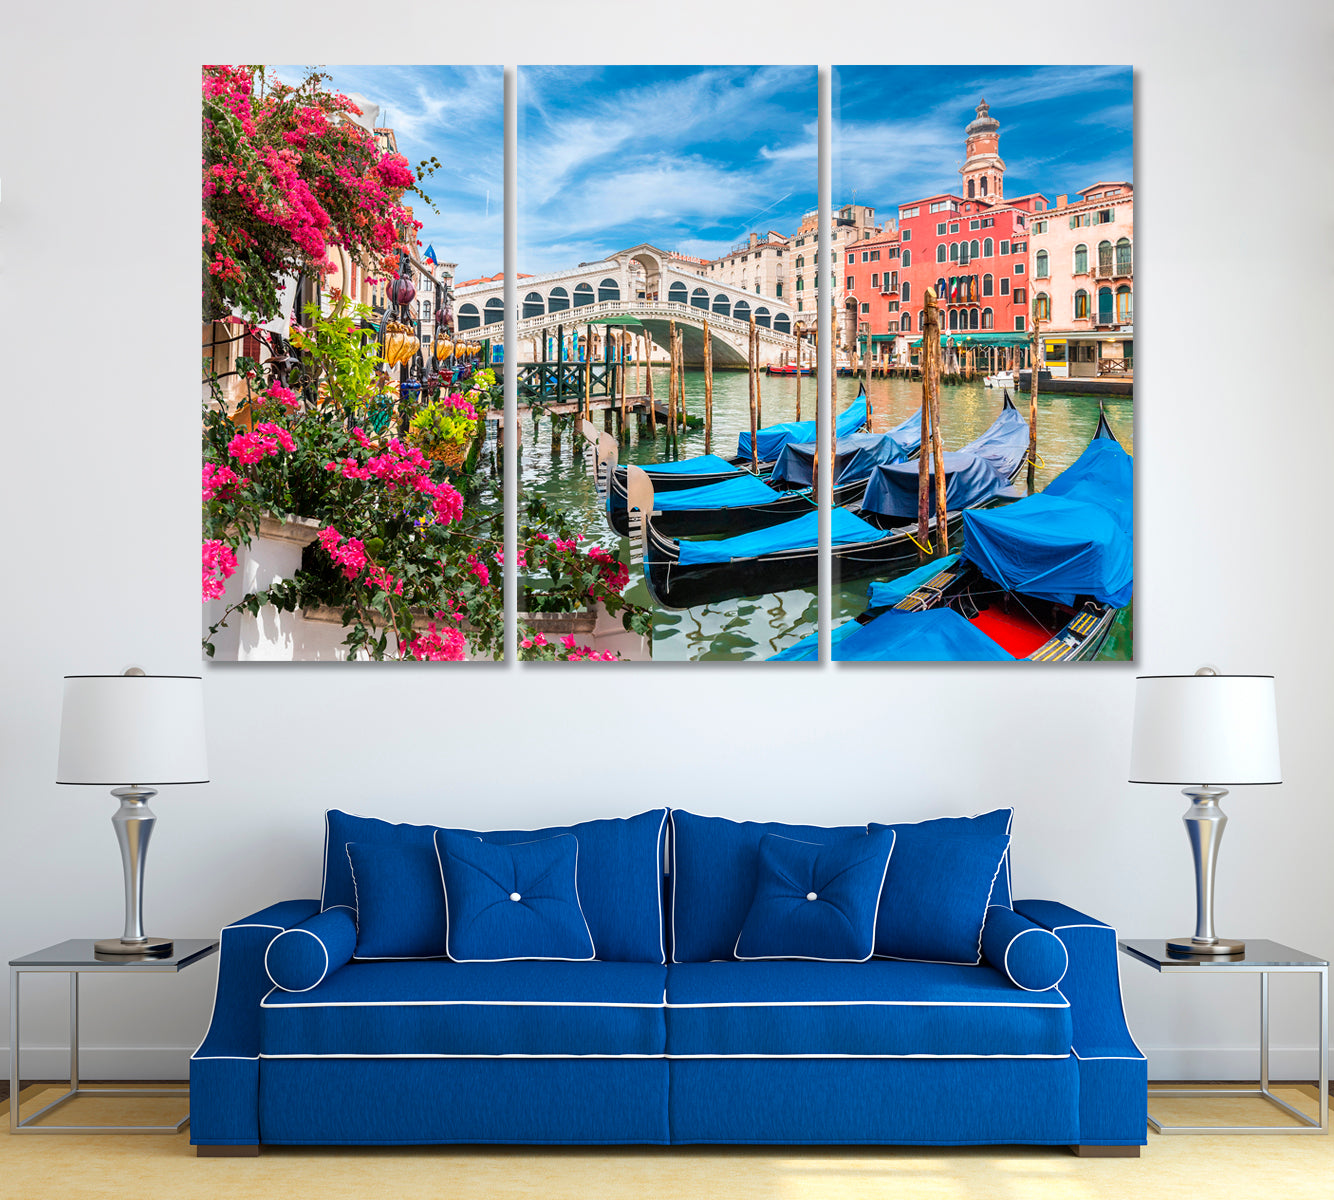 Gondola on Grand Canal Venice Italy Canvas Print ArtLexy 3 Panels 36"x24" inches 